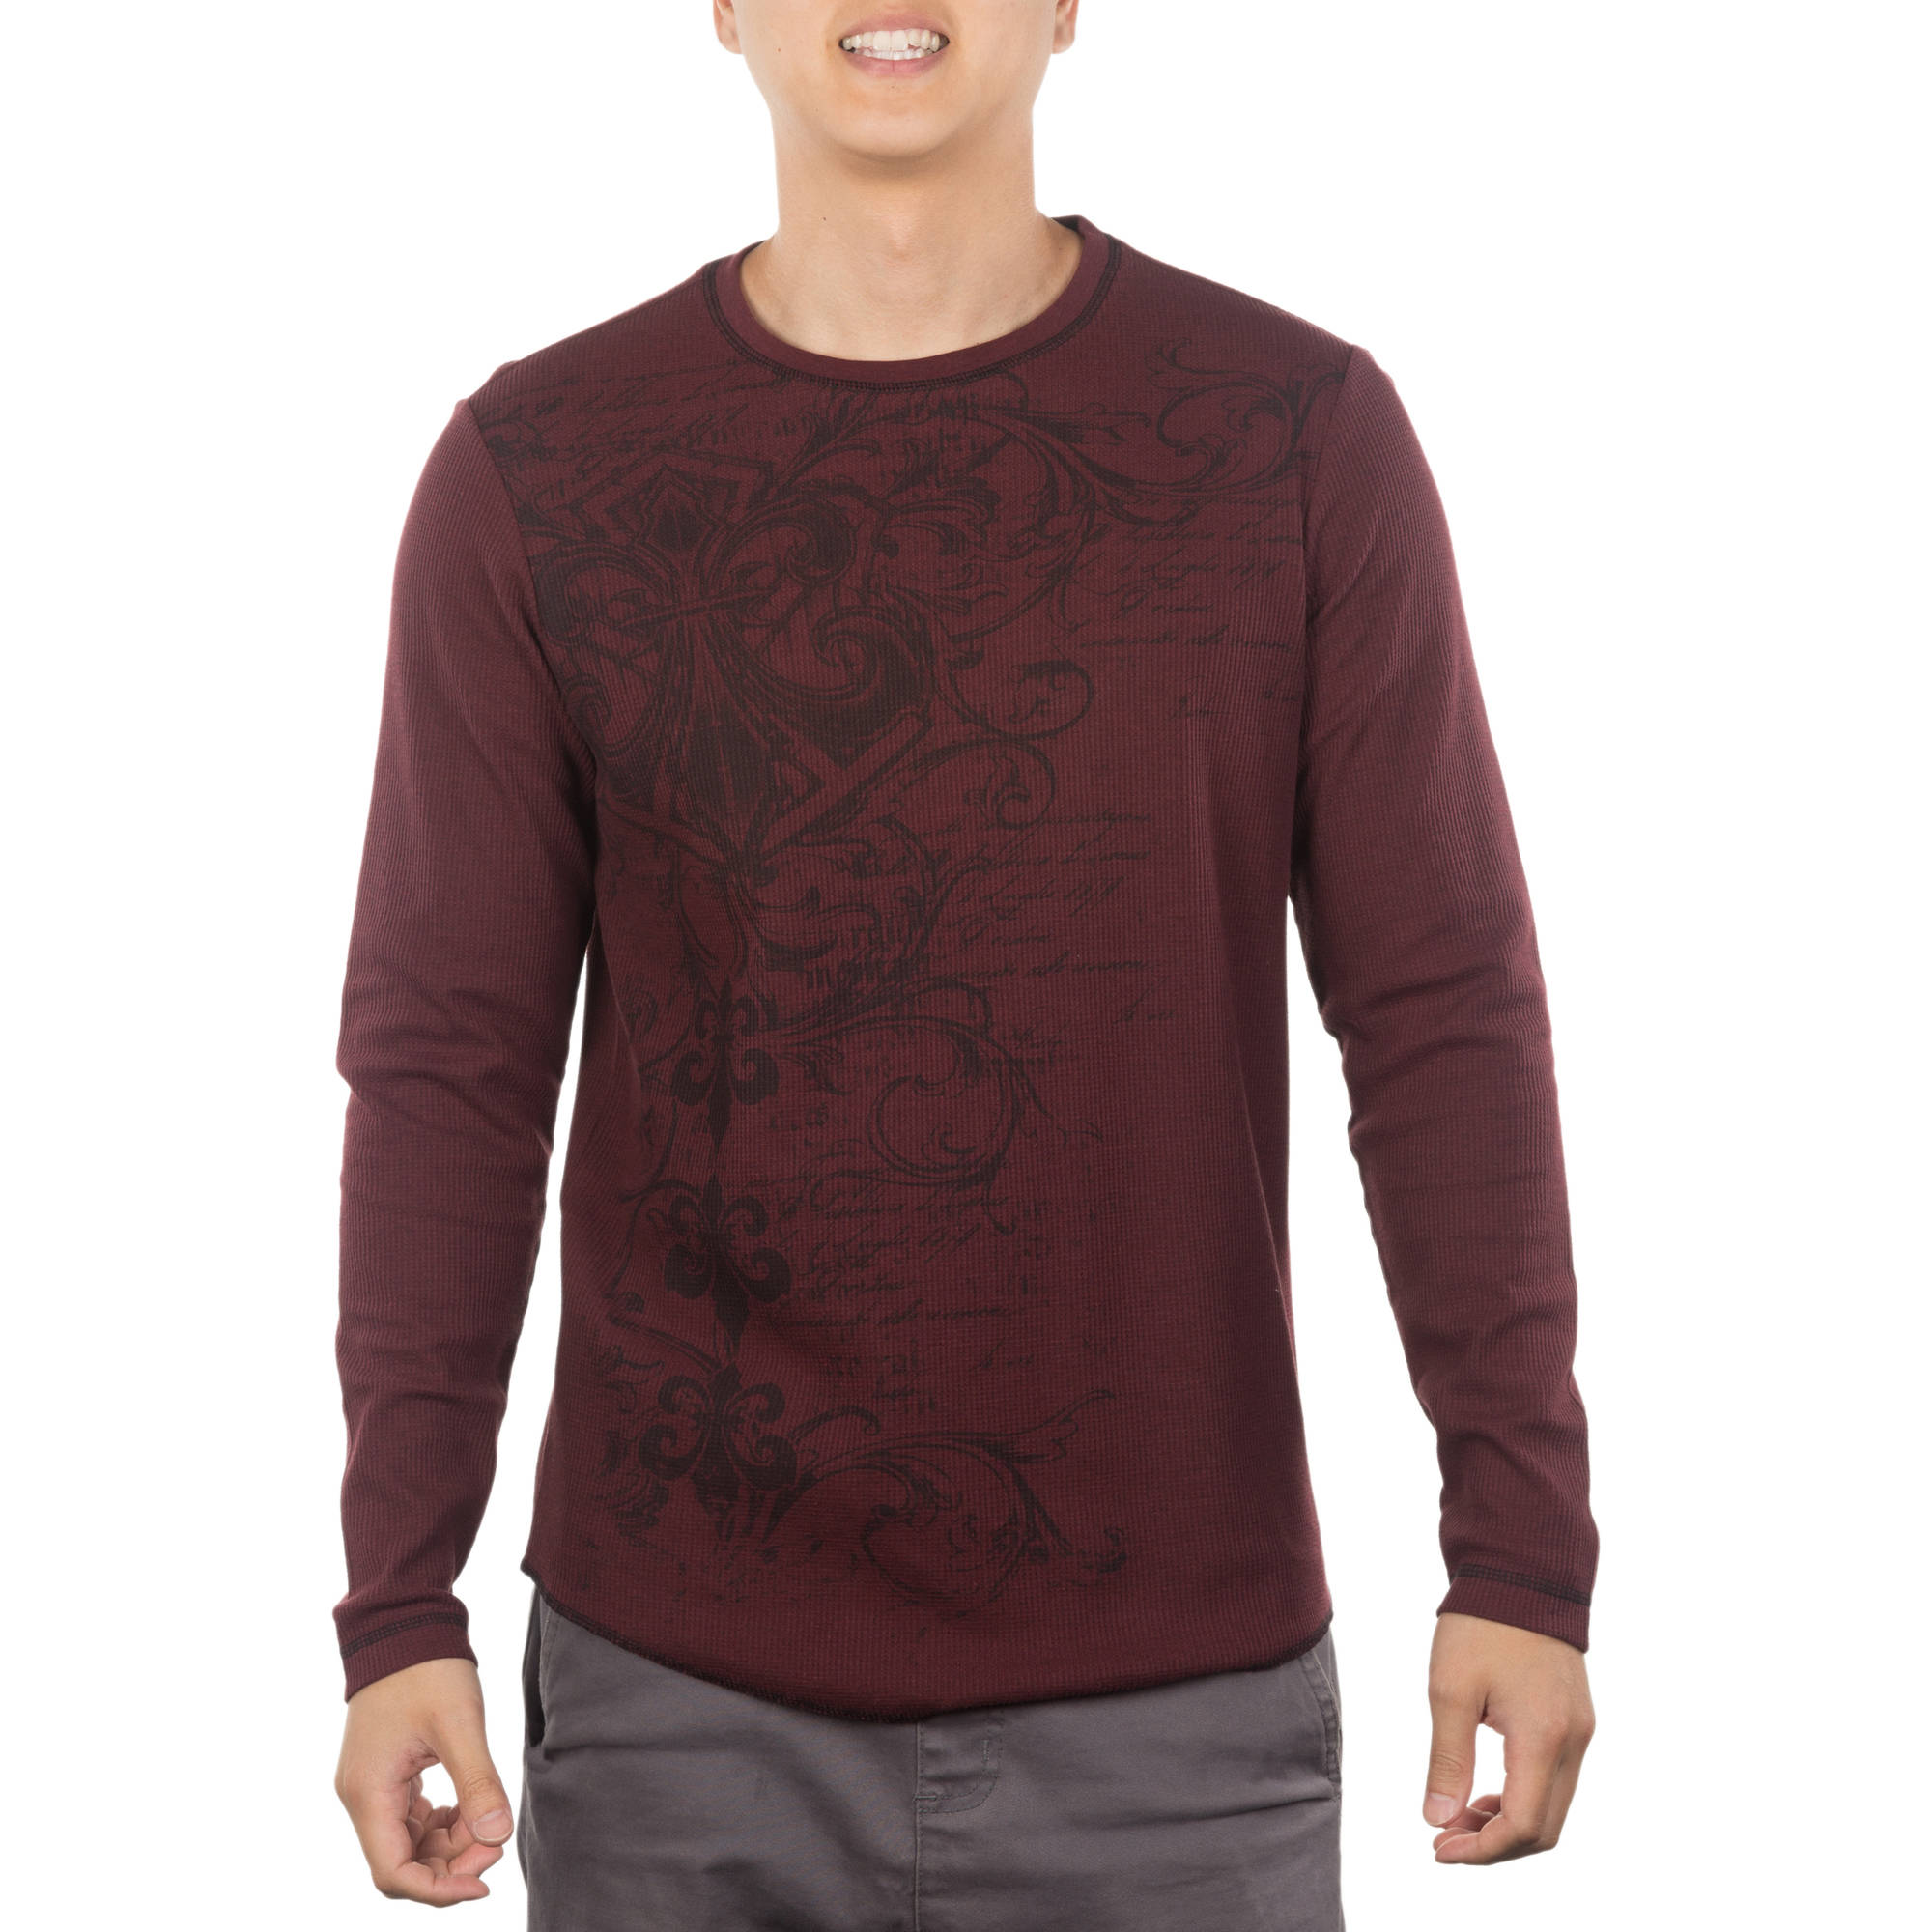 Faded Glory Men's Graphic Thermal - image 1 of 1